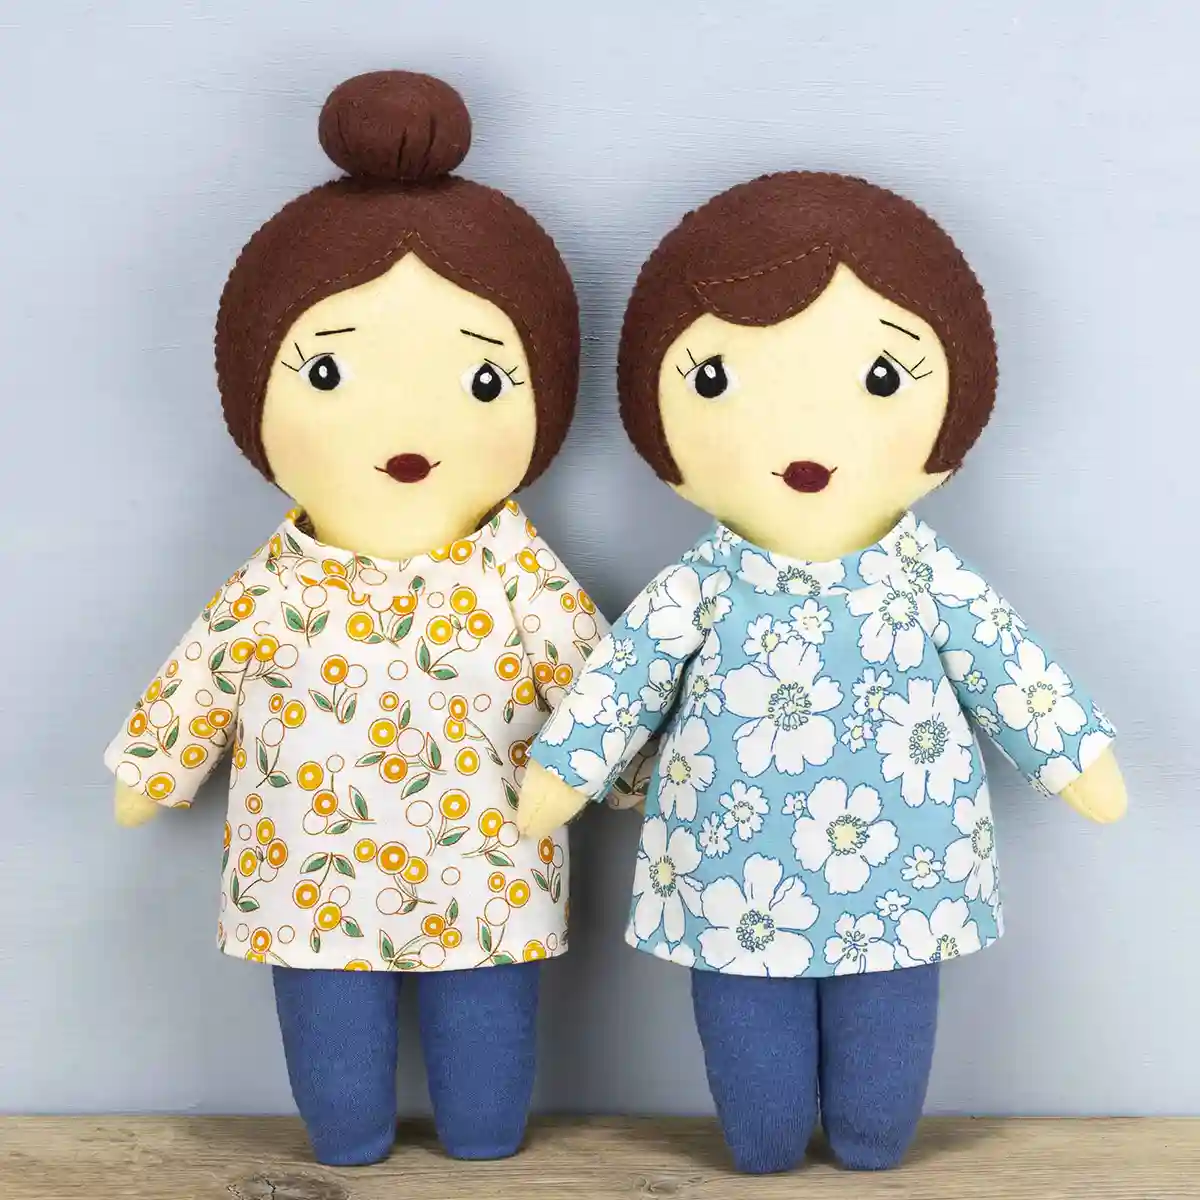 Two Daisy dolls, one with a bob hairstyle and one with a ballerina-style bun. There hair is made of felt and they wear floral-print cotton tunics in blue, yellow and white, and blue stretch tights.